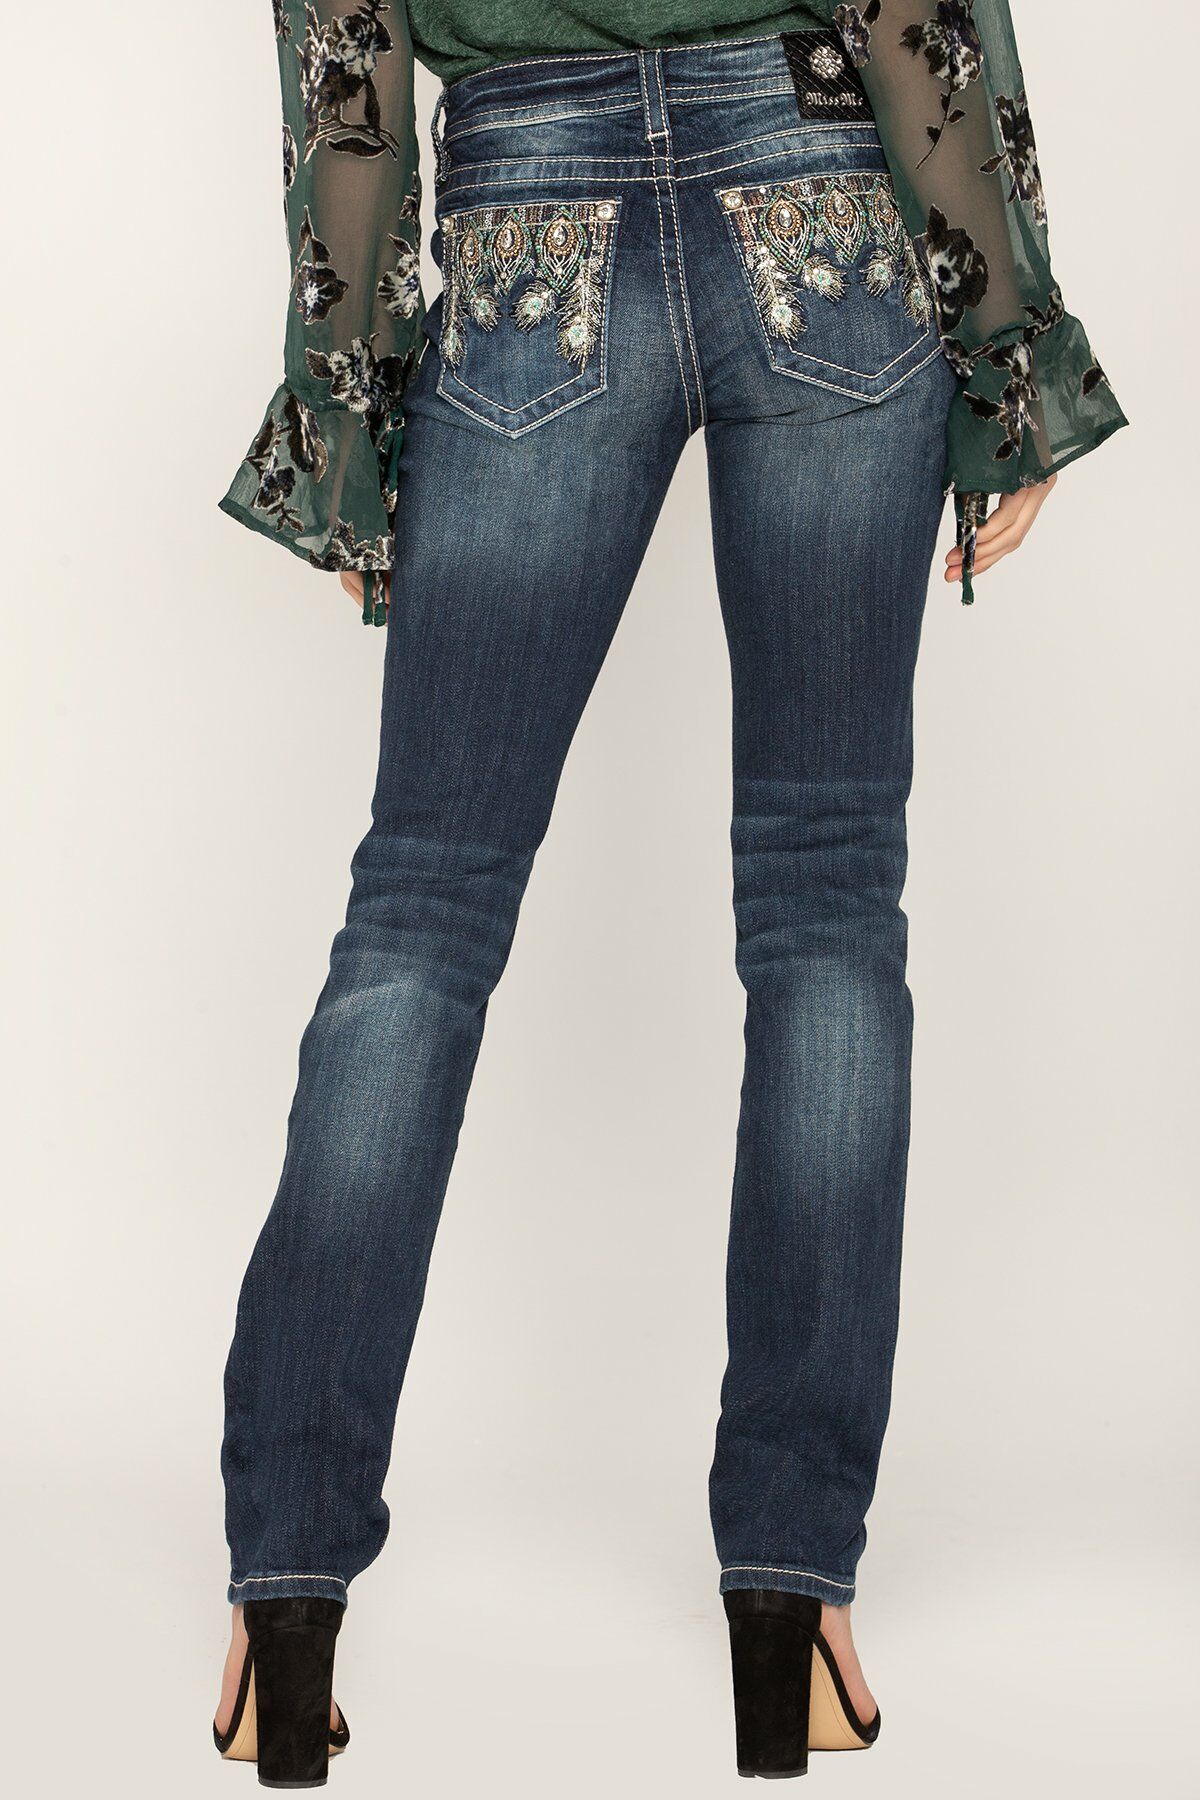 name it sale jeans